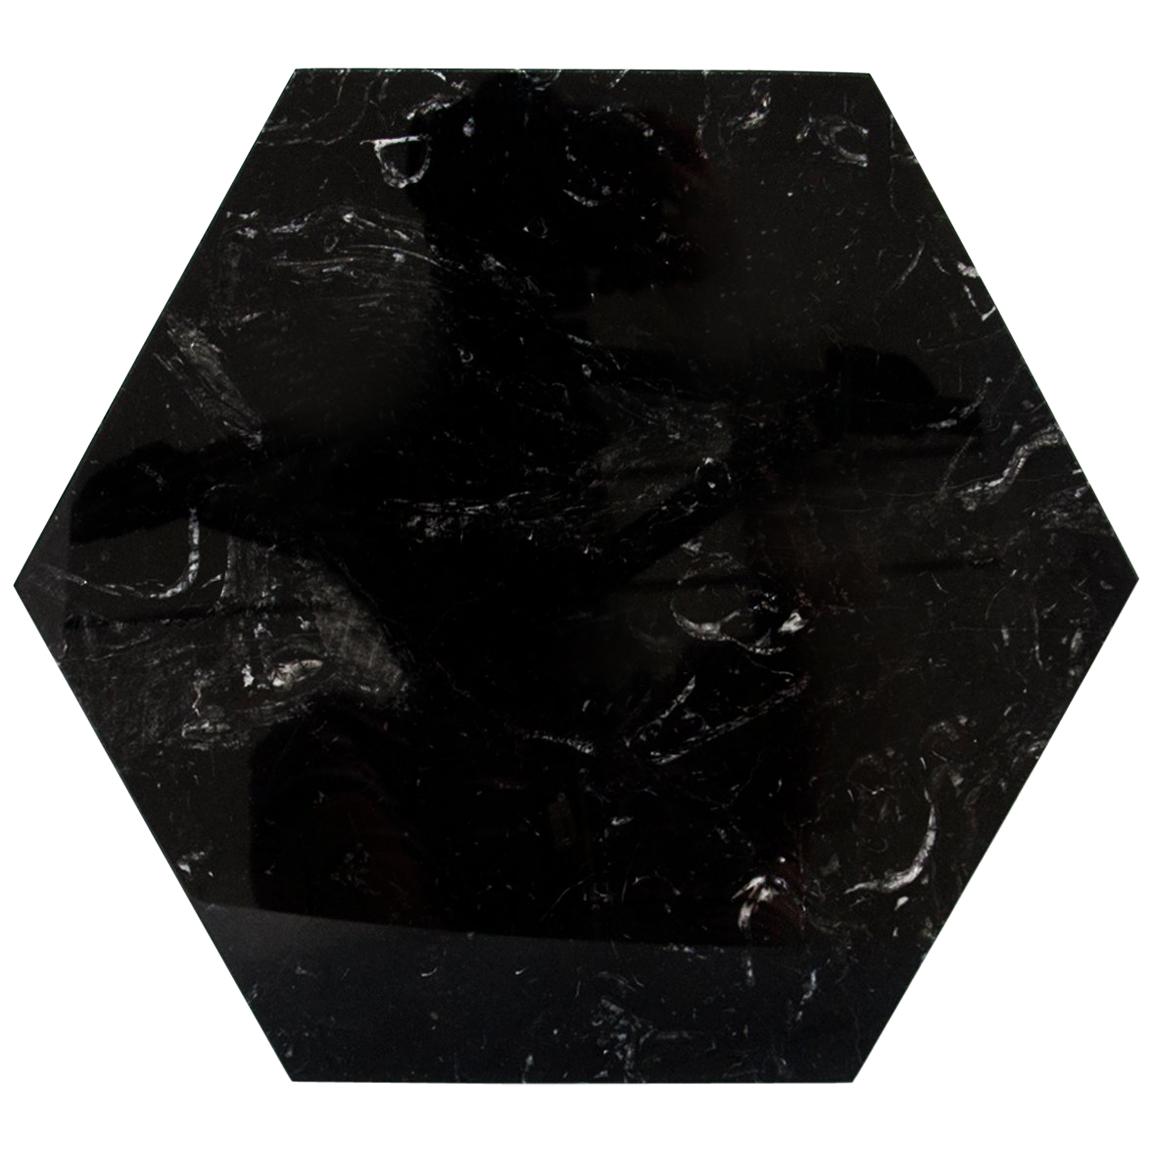 Hexagonal Black Marble Plate with Cork